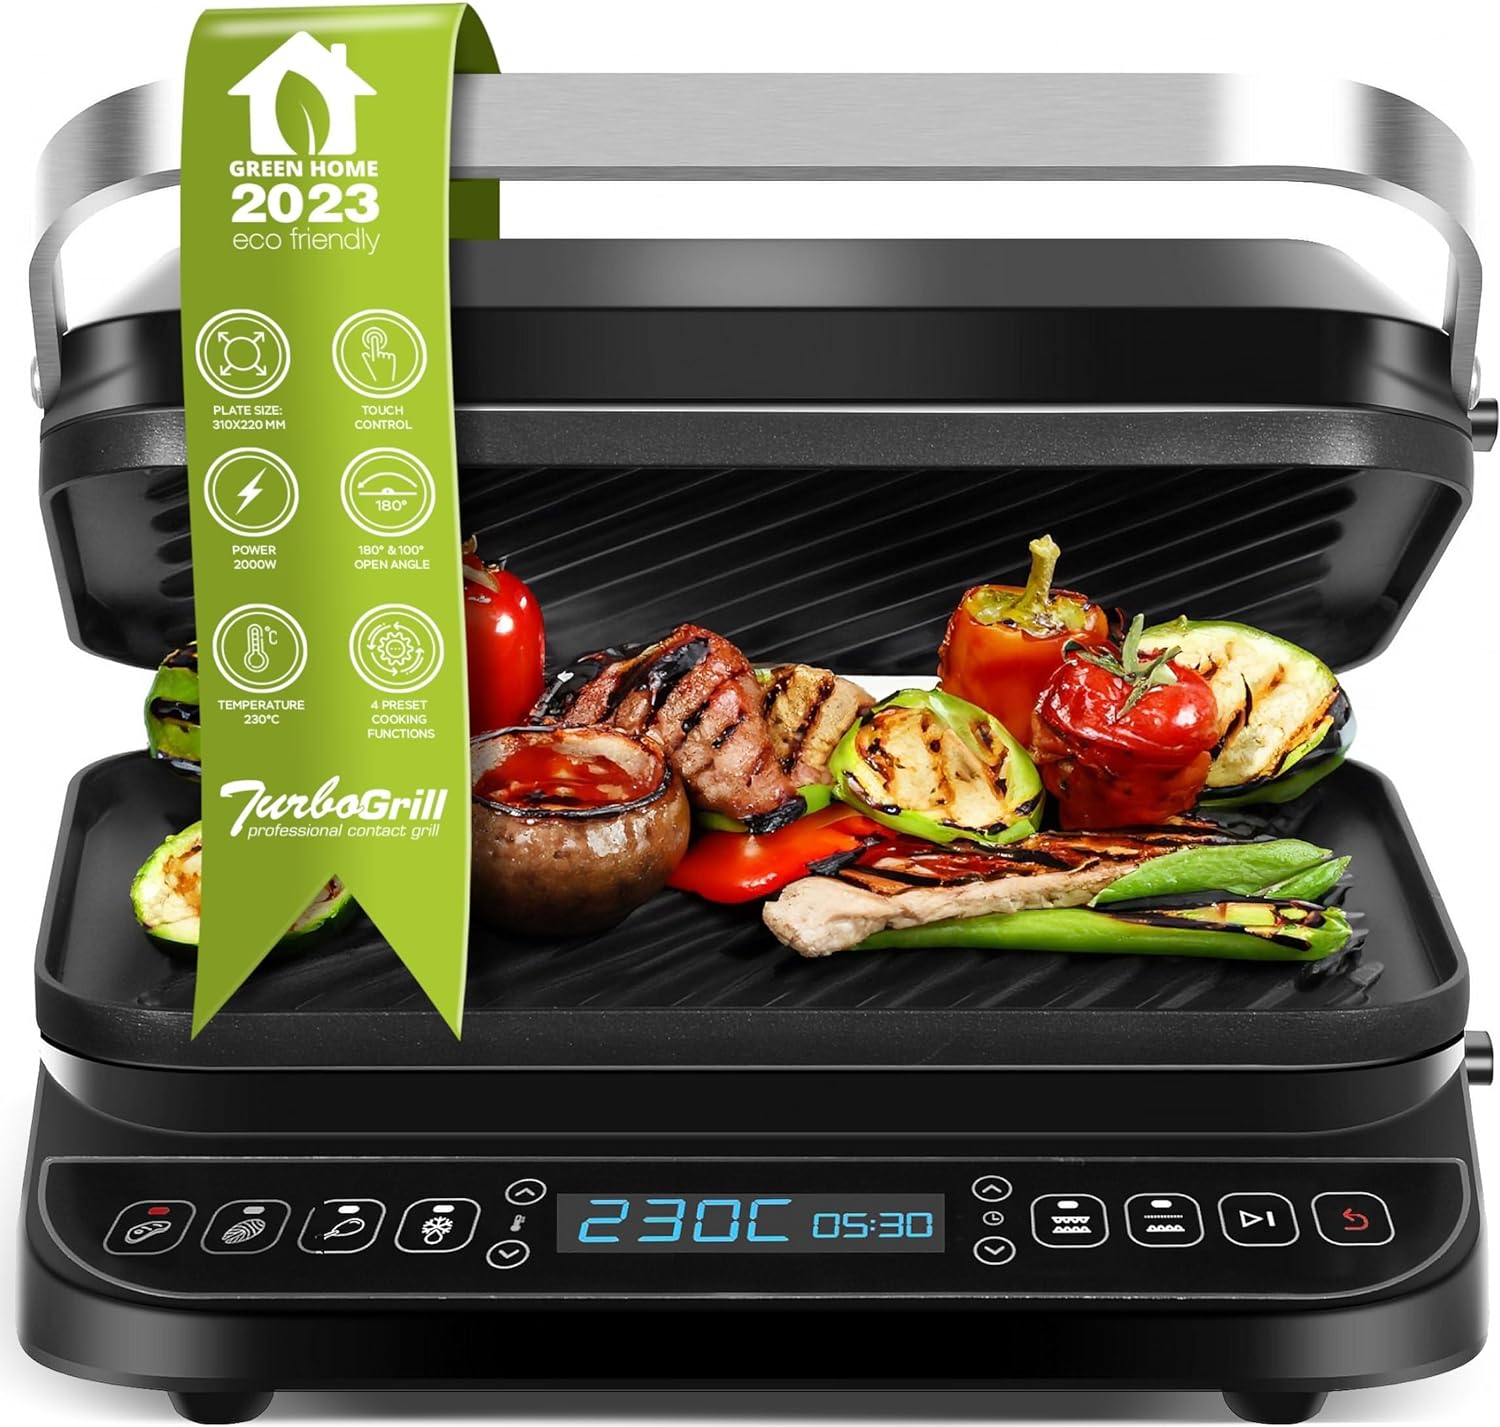 TurboTronic CG900 Contact Grill, Removable Plates, LCD Display, Digital, 180° Opening, Table Grill, Panini Maker, Electric Grill, Meat Grill, Burger Grill, Steak Grill, Sandwich Toaster, Silver